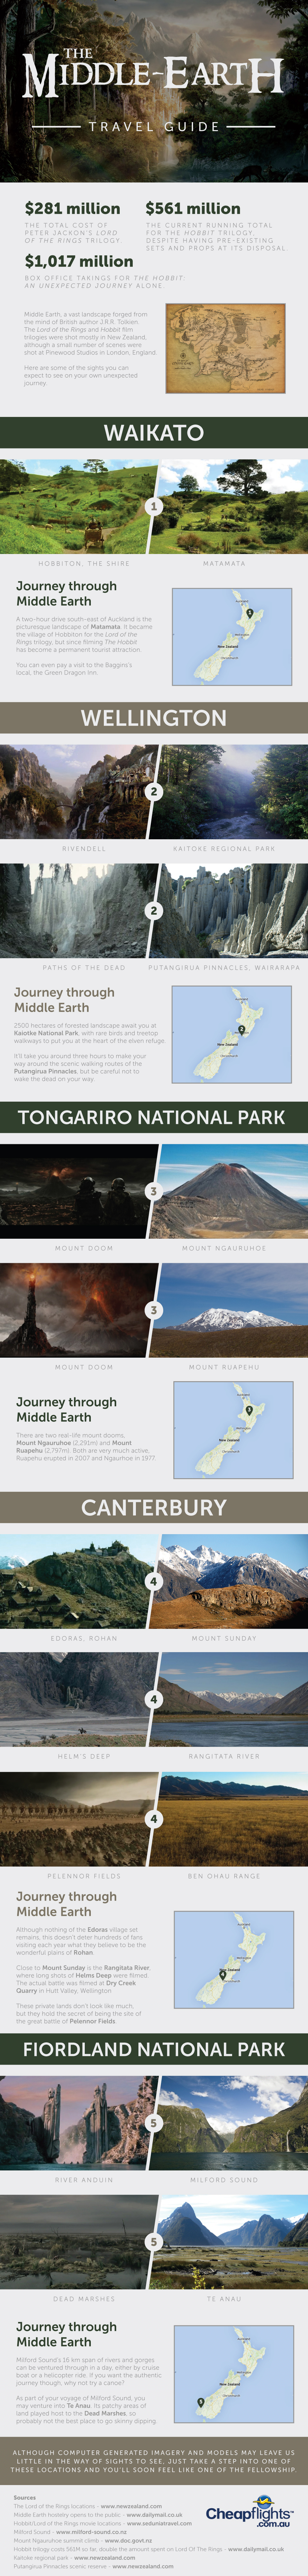 The Middle-Earth Travel Guide